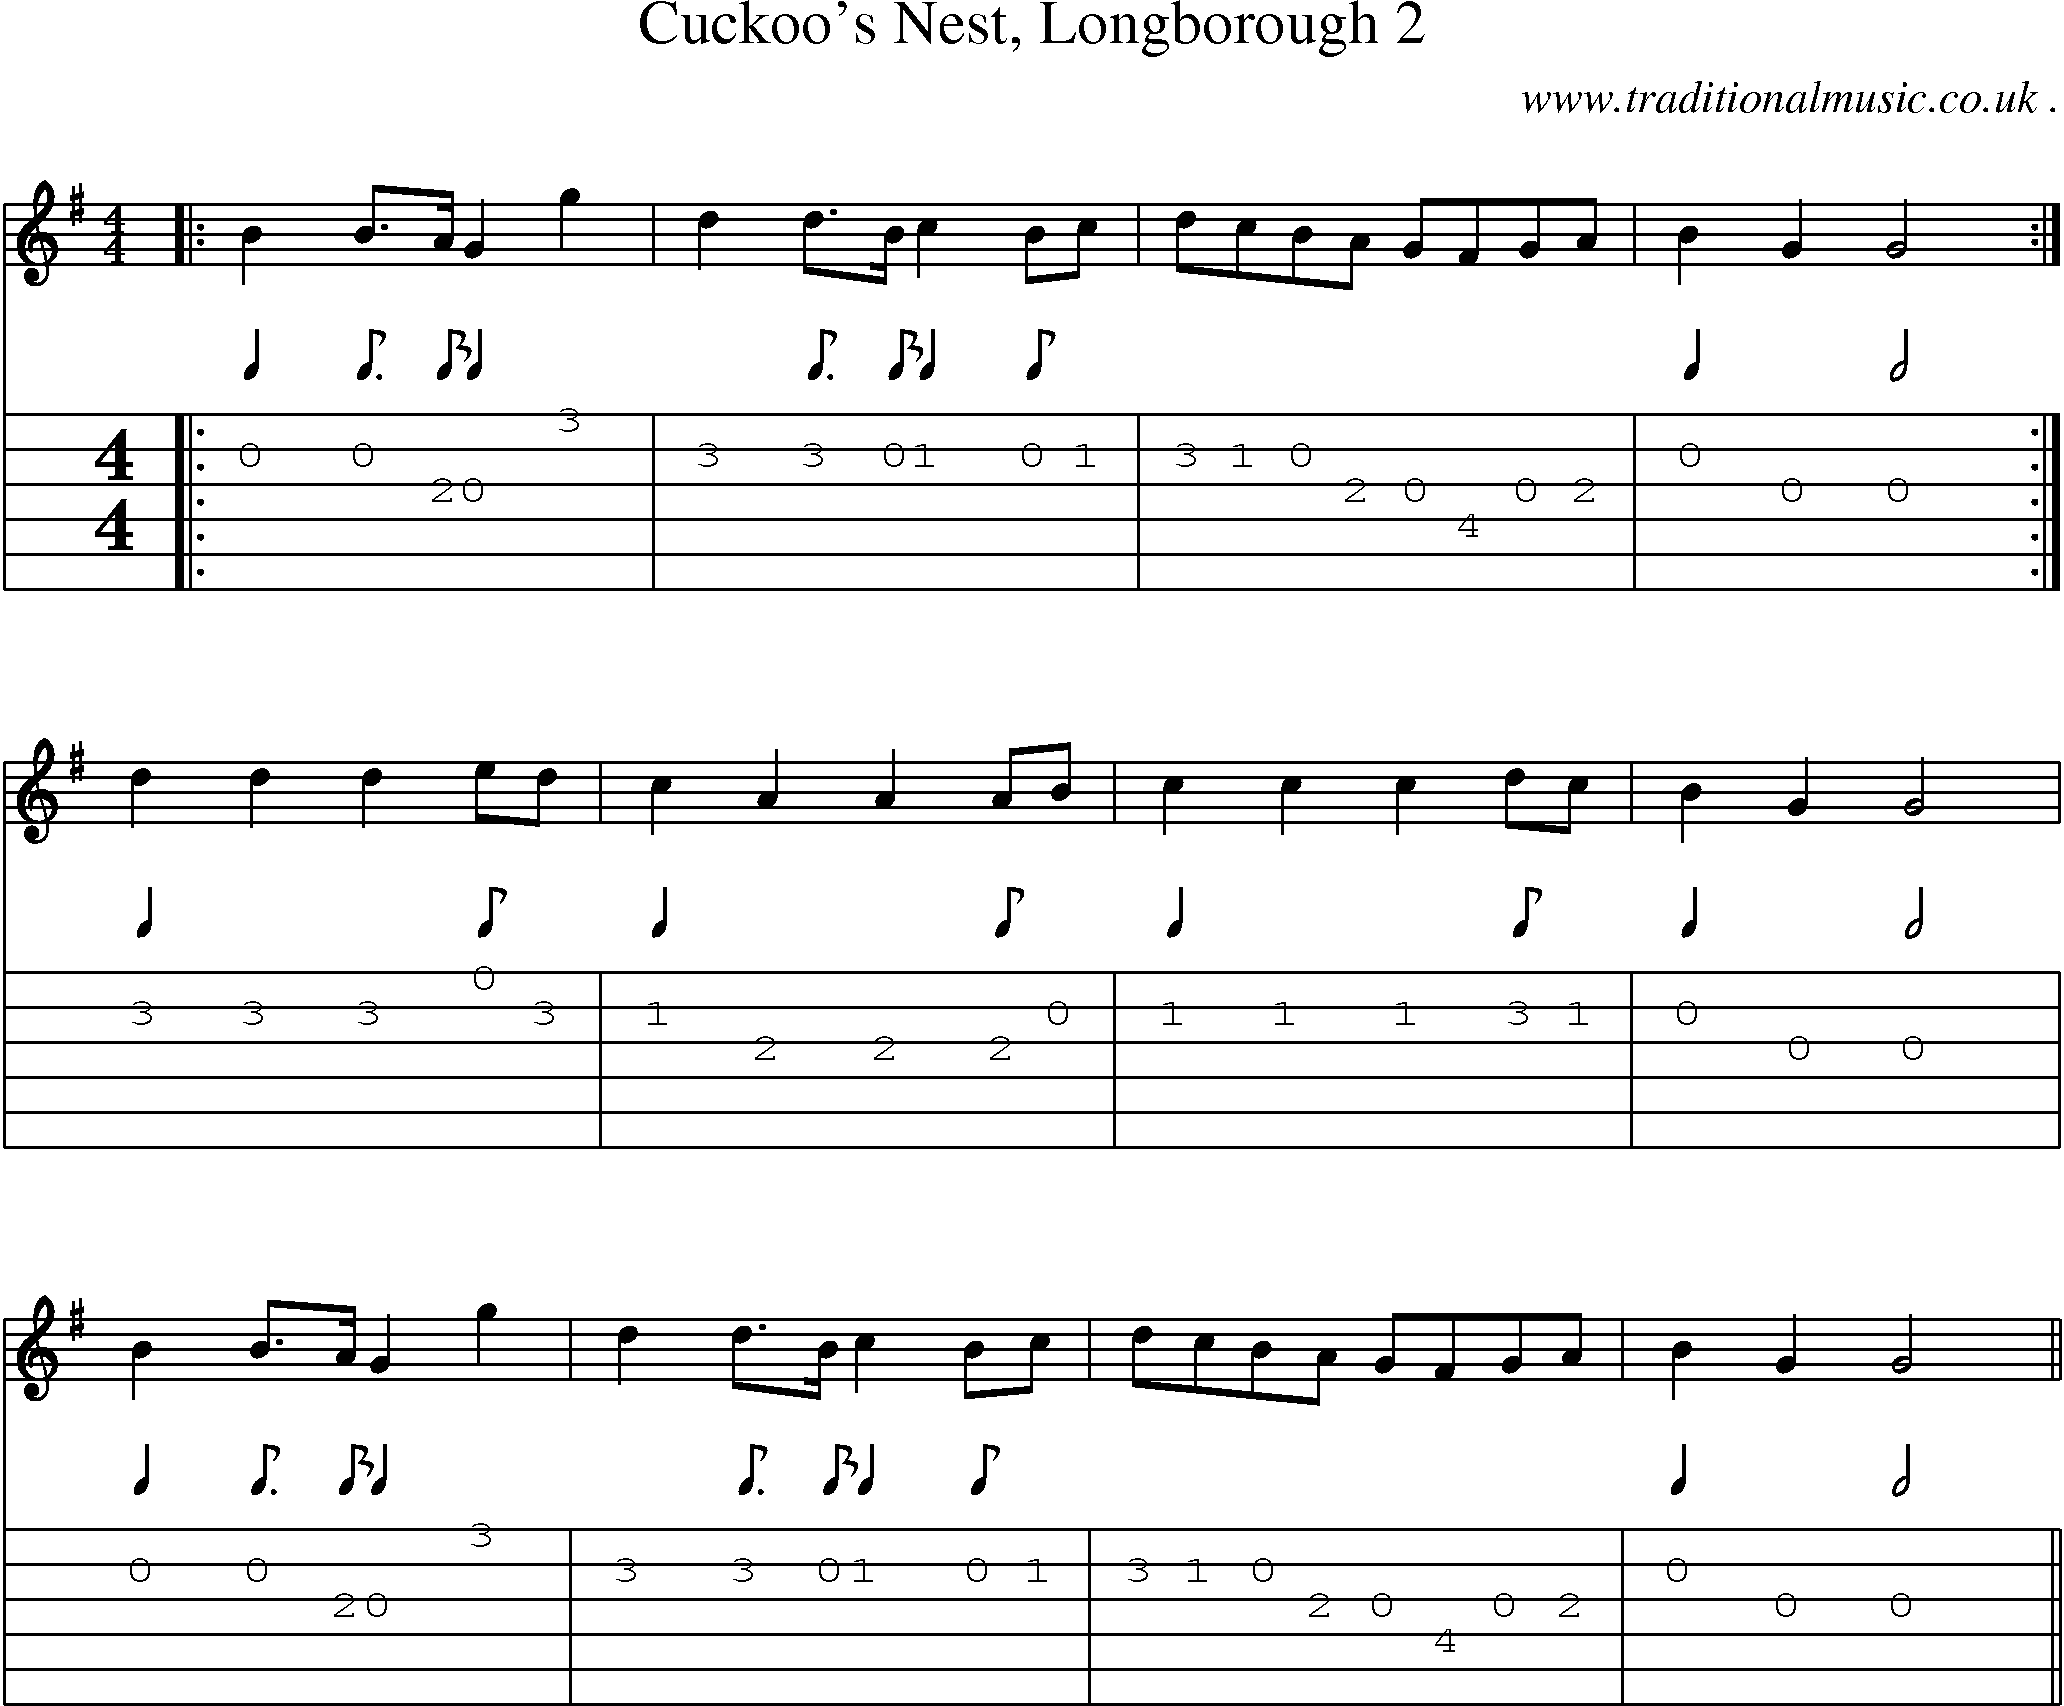 Sheet-Music and Guitar Tabs for Cuckoos Nest Longborough 2